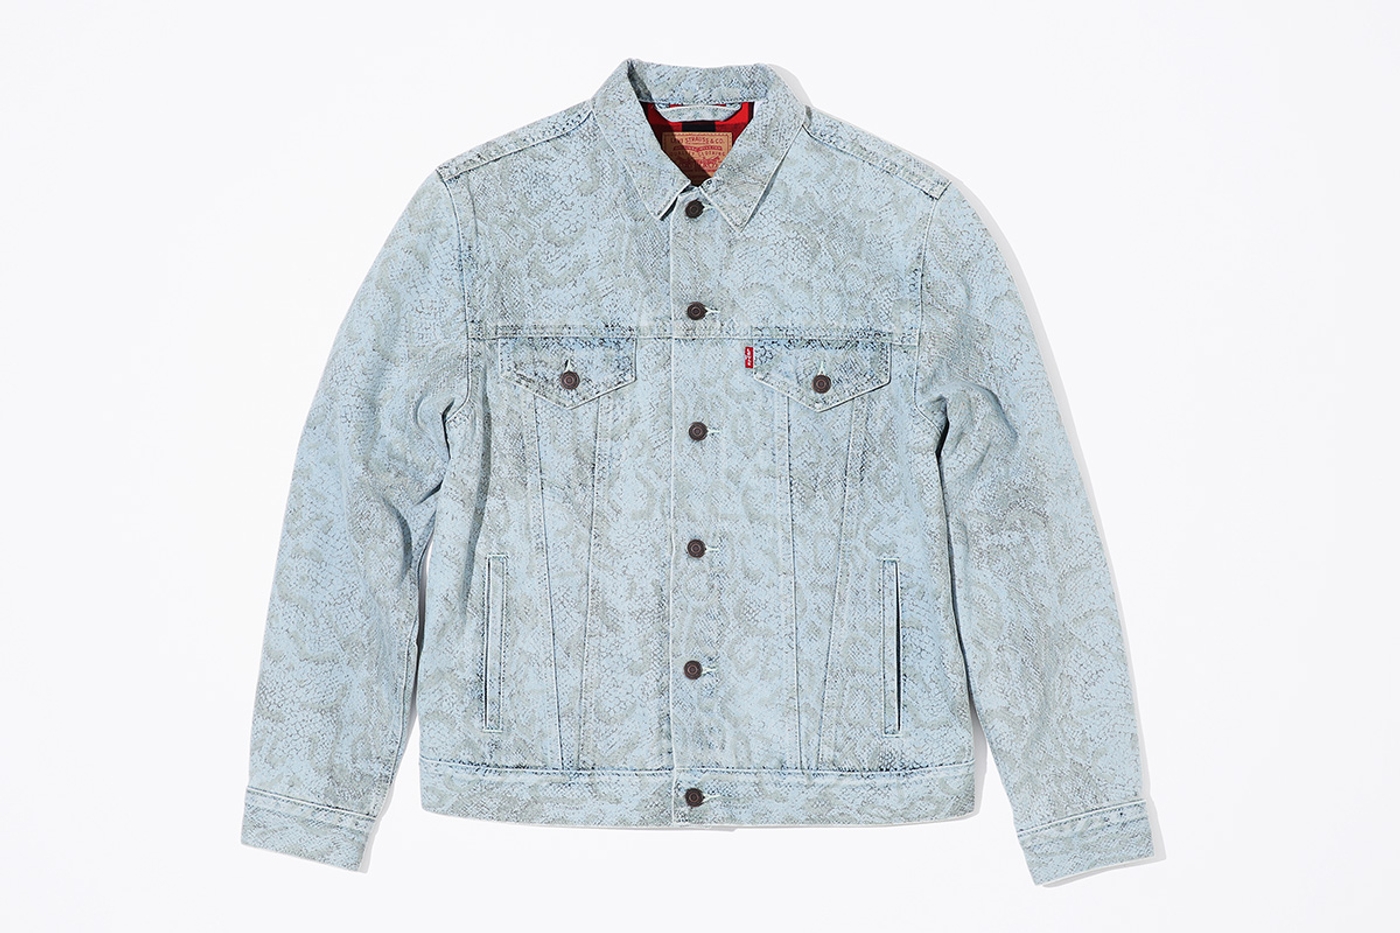 Trucker Jacket with cotton flannel lining. (14/16)